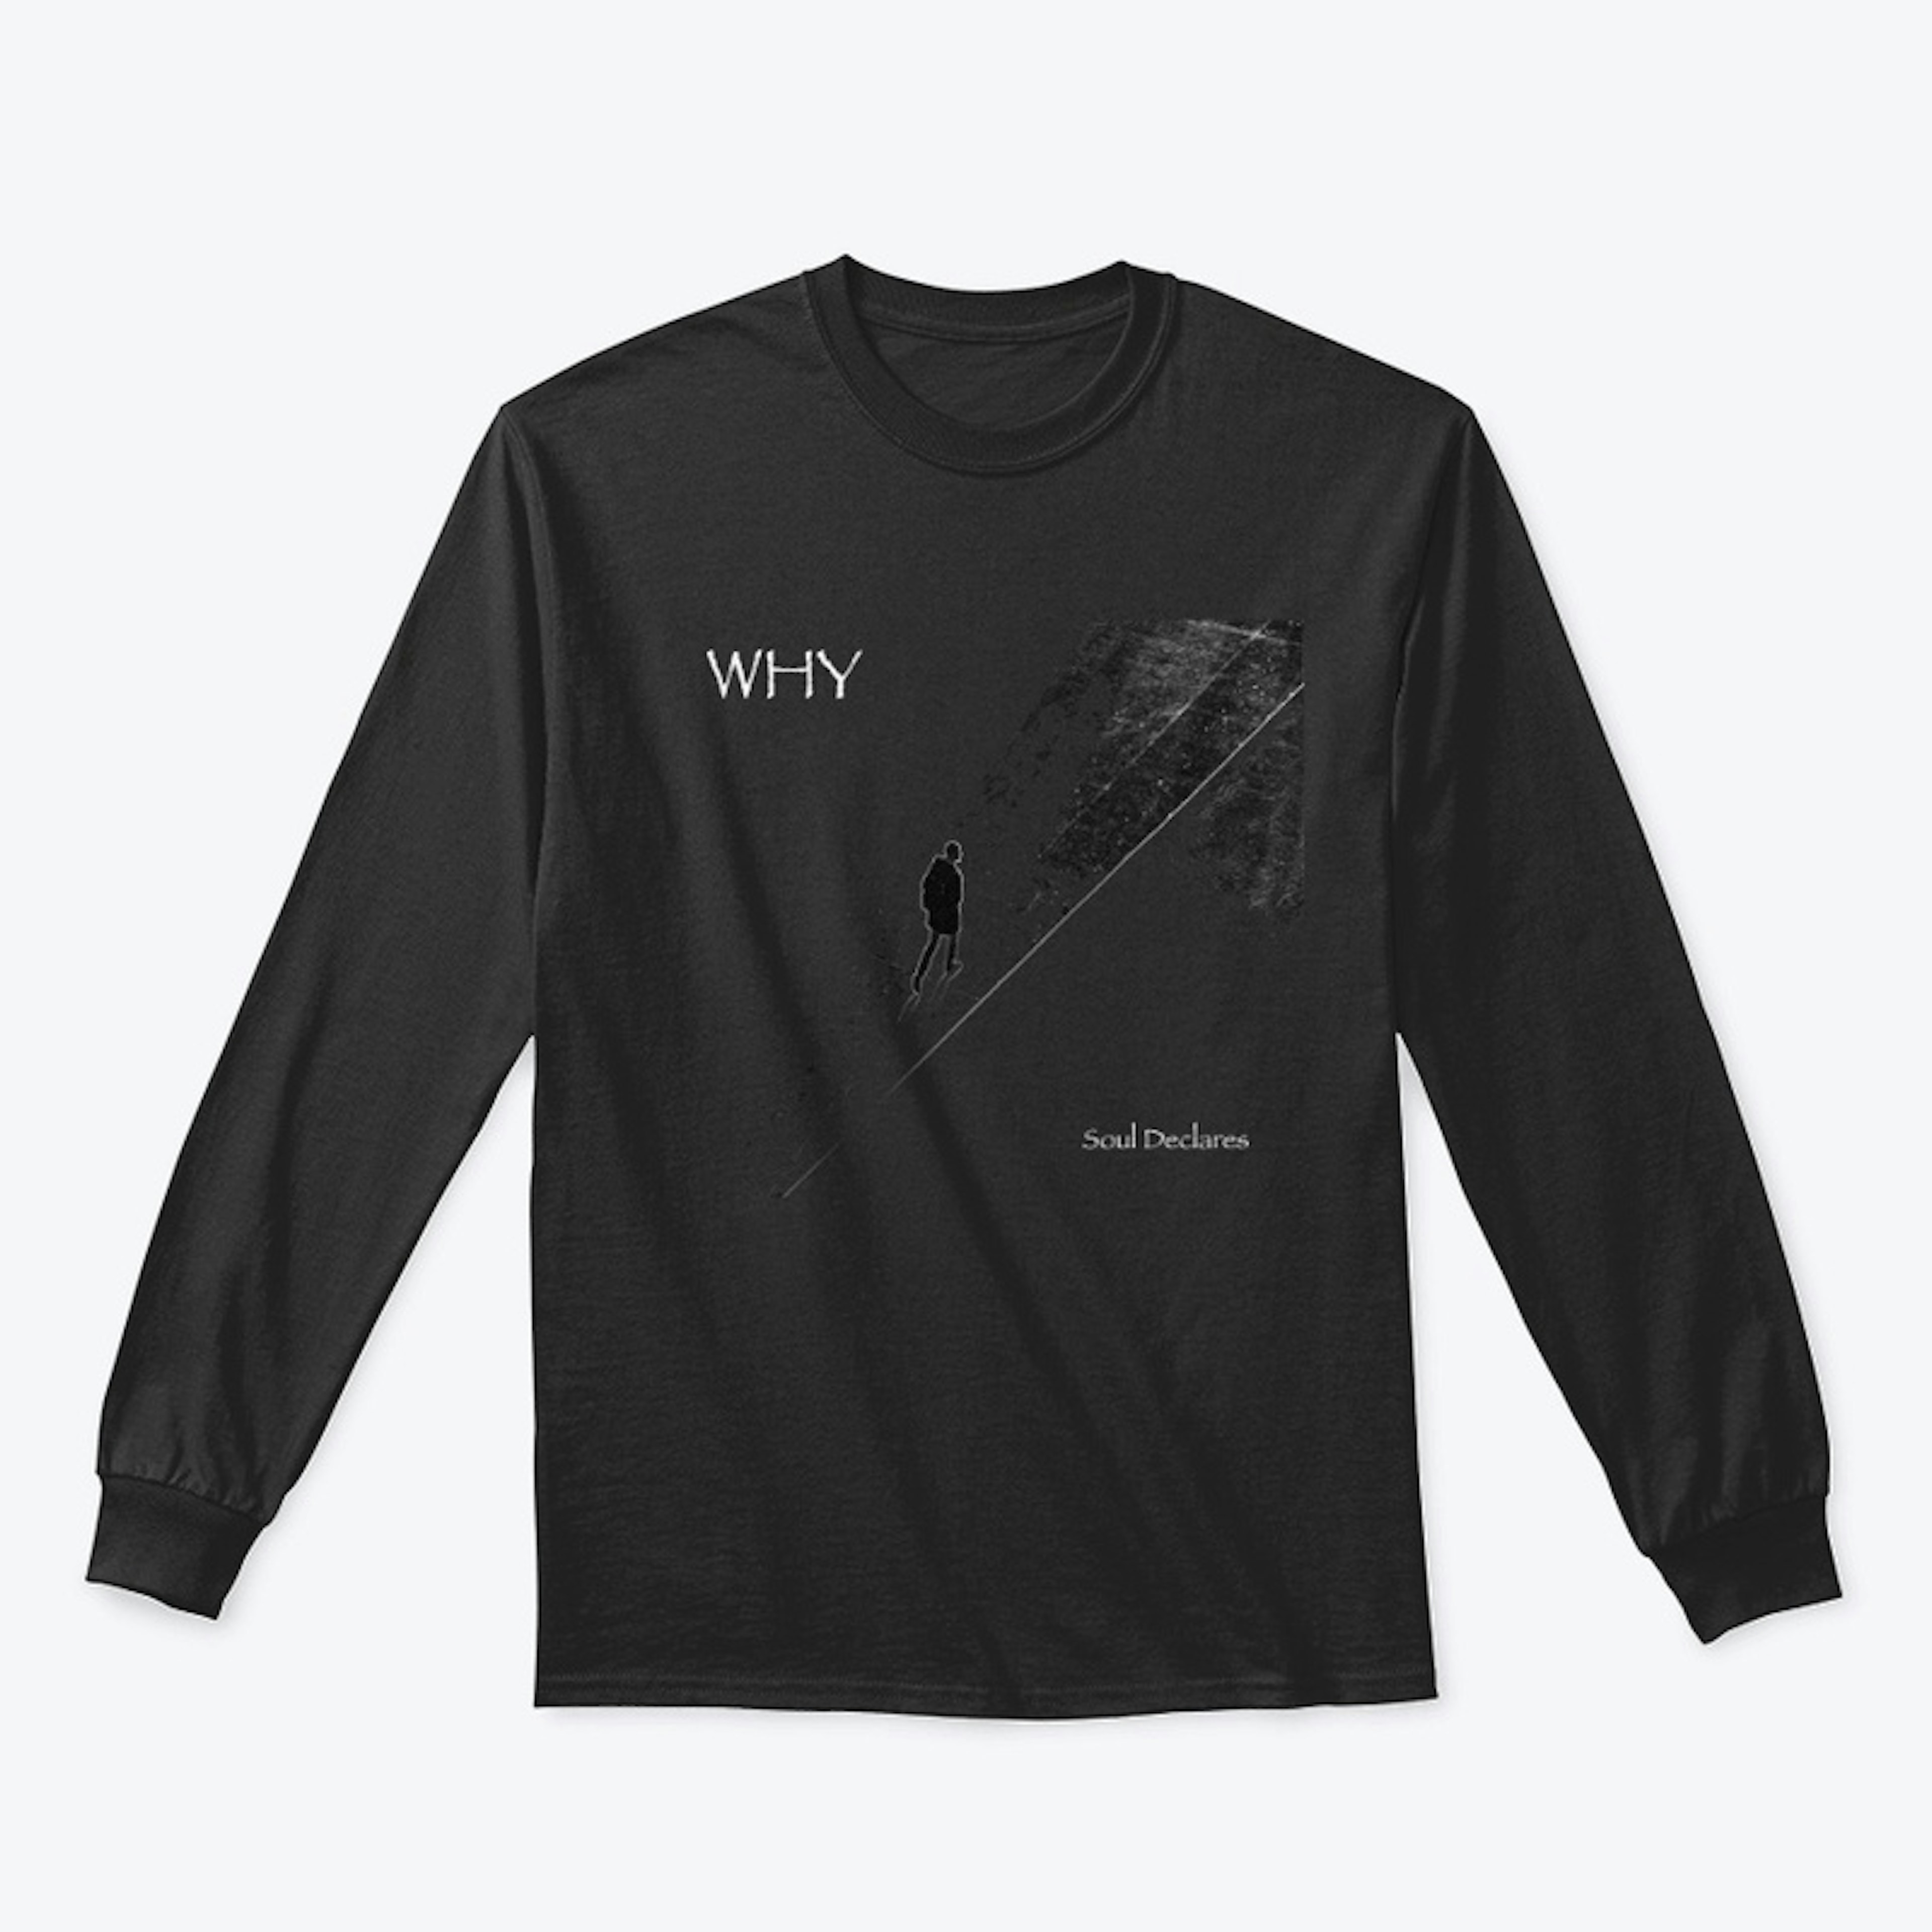 WHY - Soul Declares" Long Sleeve T